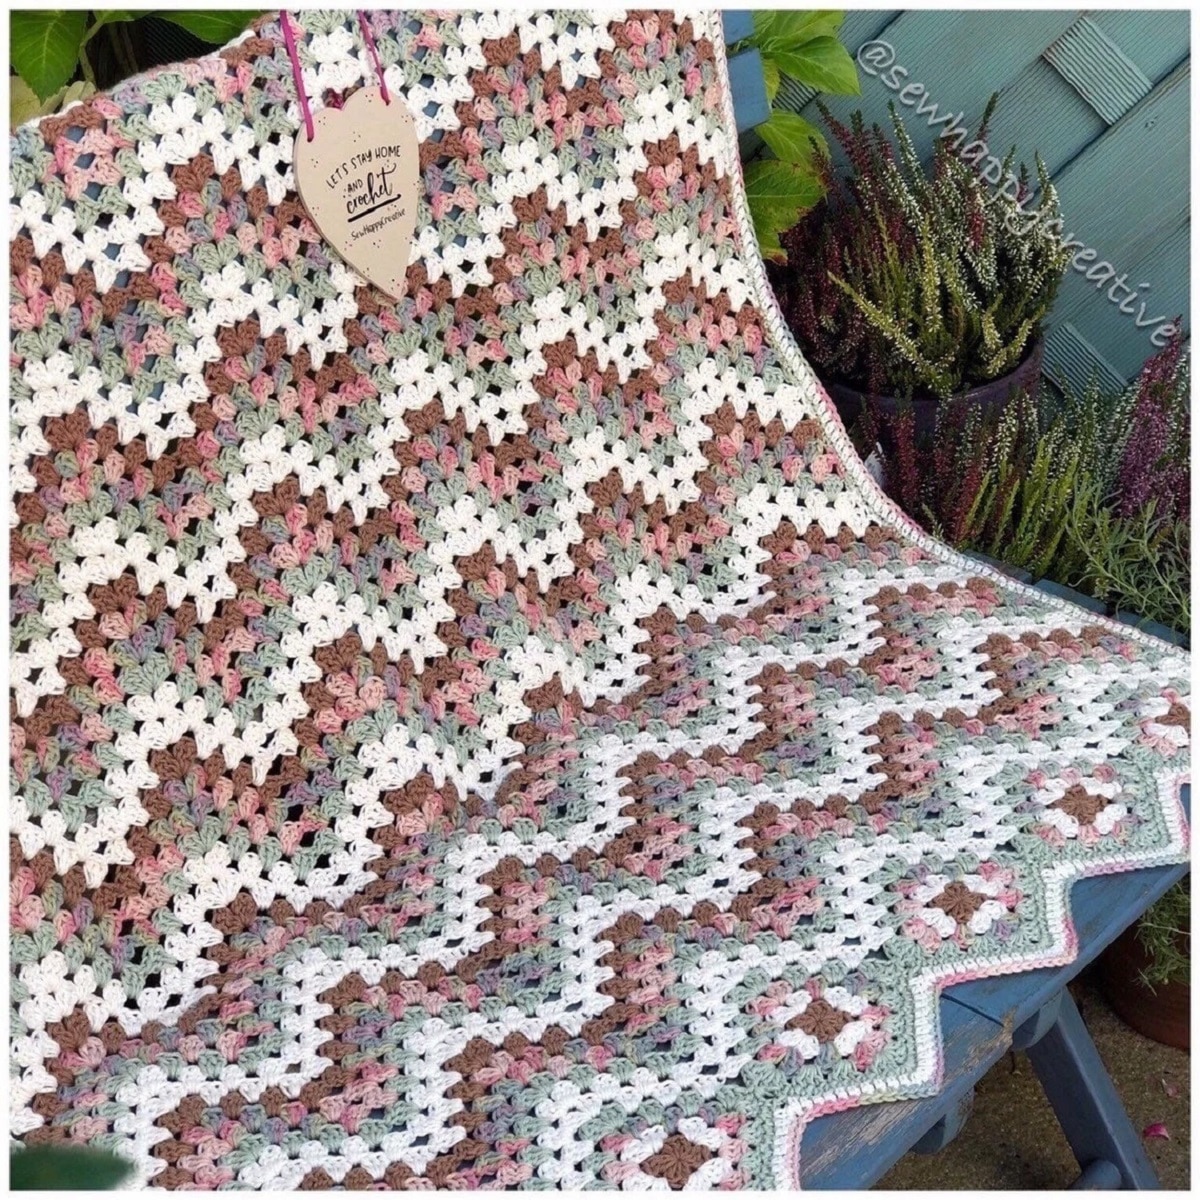 Green, pink, brown, and white chevron style crochet blanket with small granny squares at the bottom and a zig-zag hem.